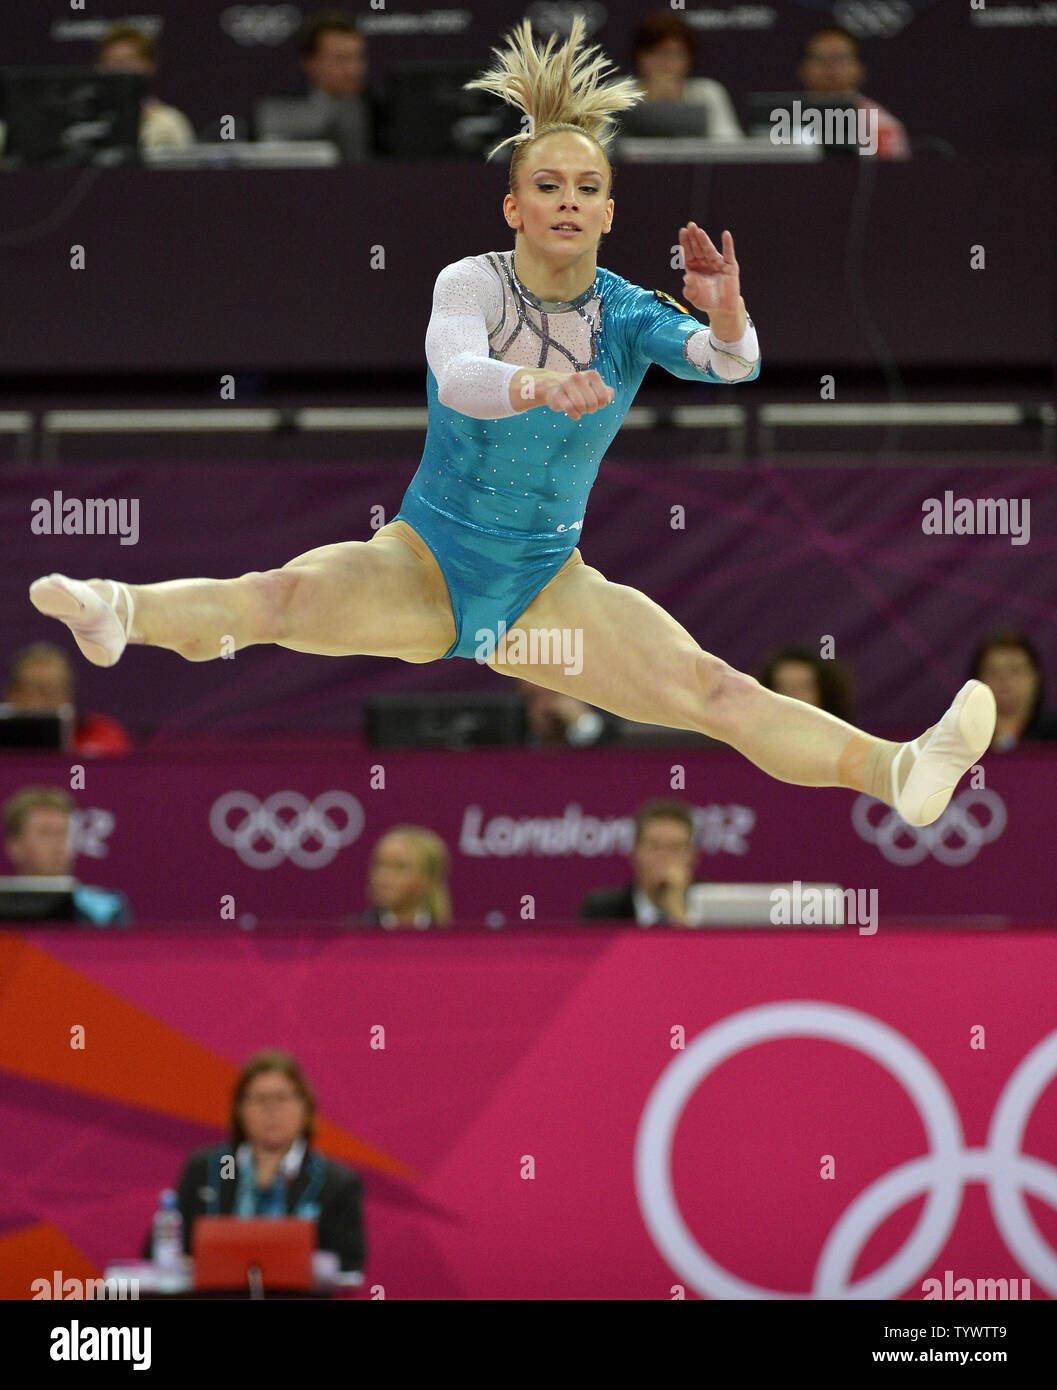 Romanian gymnast Catalina Ponor goes through her routine during the Apparatus Finals on the floor exercise, to win the silver medal at the Greenwich North Arena at the 2012 Summer Olympics, August 7, 2012, in London, England.              UPI/Mike Theiler Stock Photo